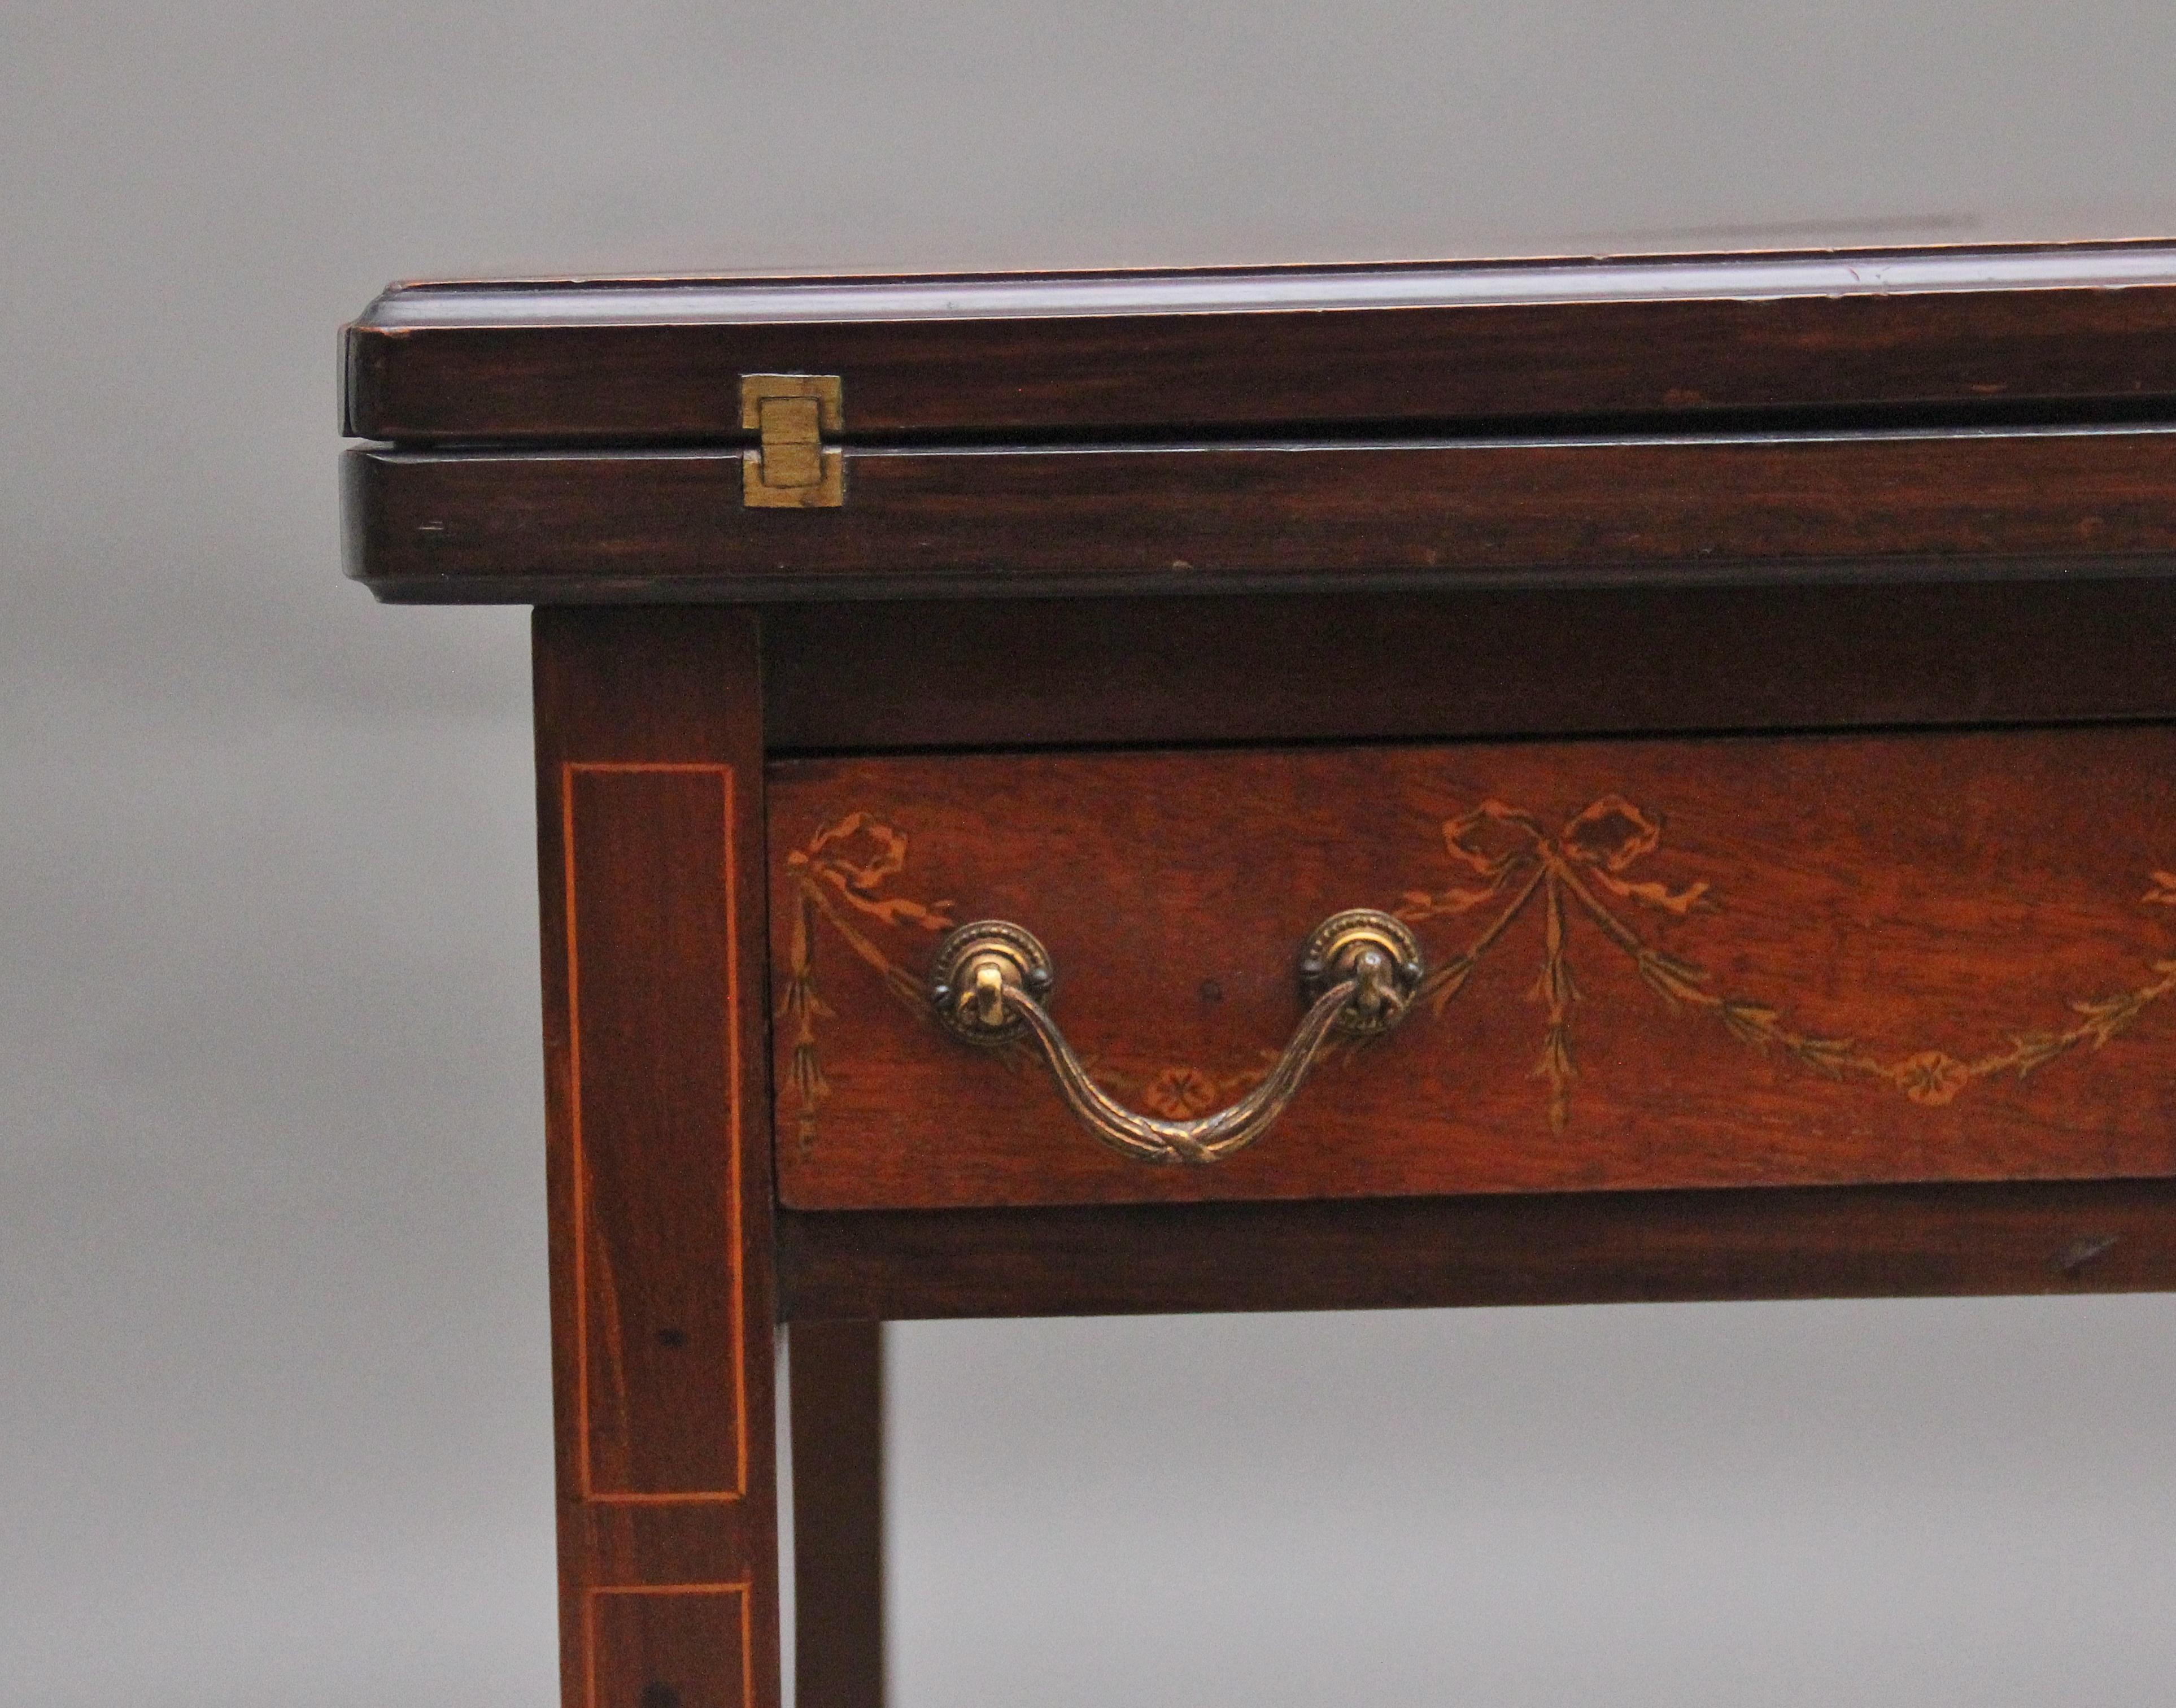 Early 20th Century mahogany and inlaid card table, having a wonderfully inlaid top with decorative floral and boxwood inlay, the four flaps turn over to reveal a brown baize lined playing surface, having a mahogany lined frieze drawer below with the